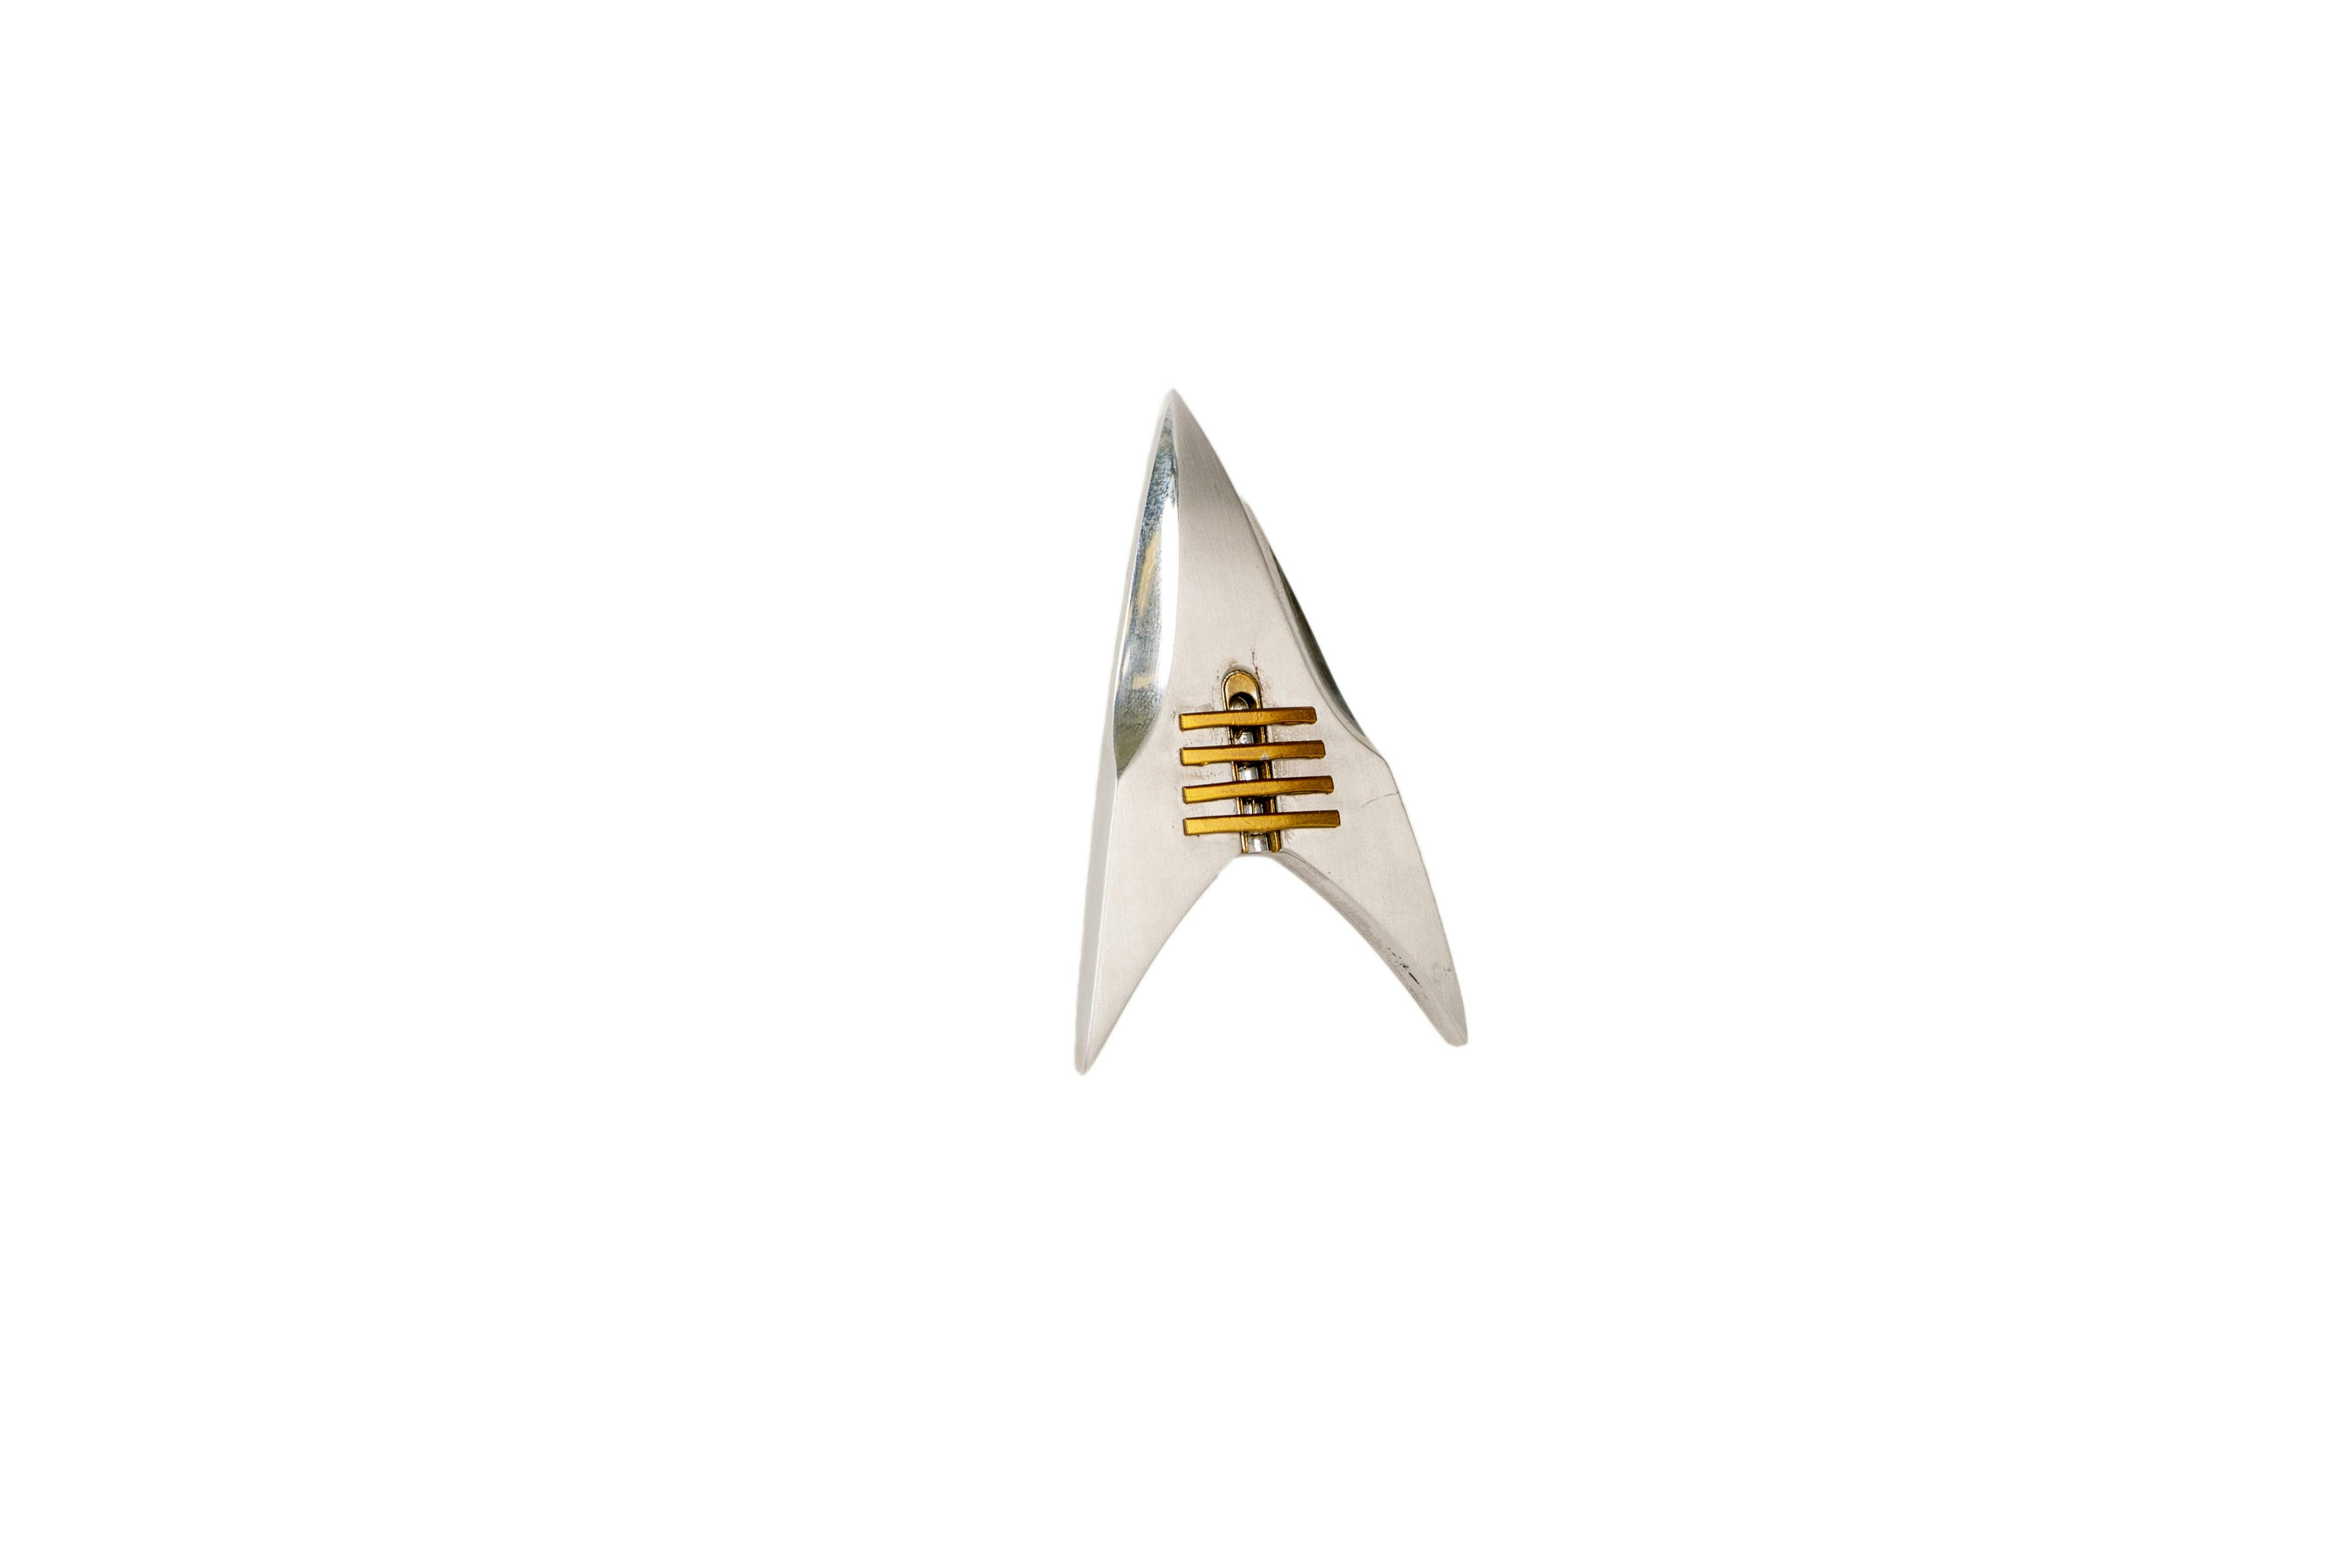 The Confederation combadge worn by Jean-Luc Picard in season two of Star Trek: Picard.